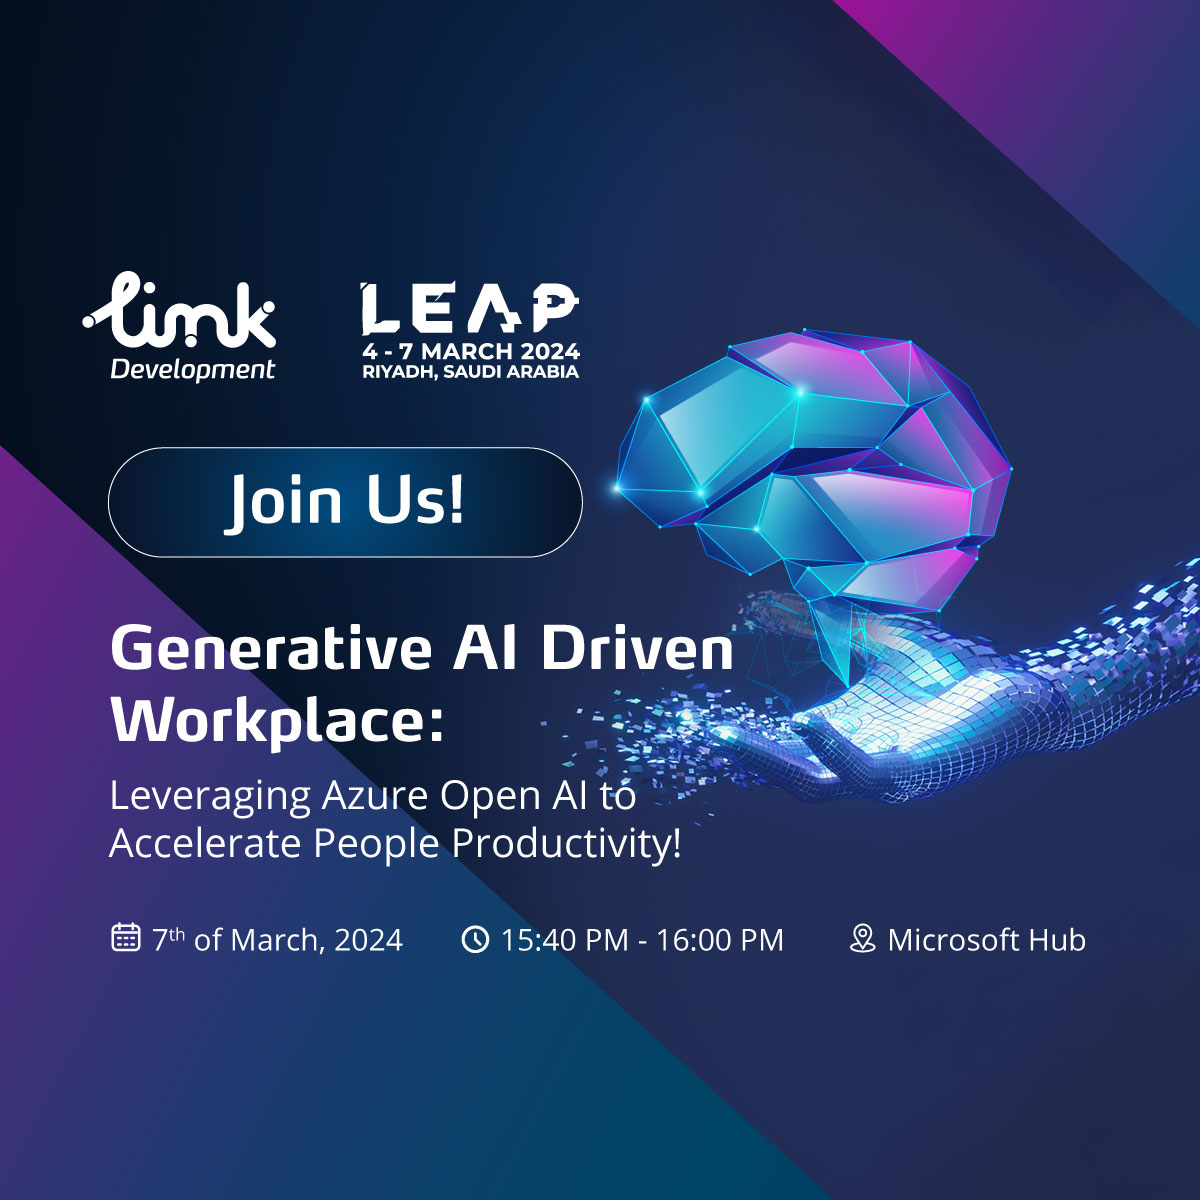 The countdown has started for #LEAP2024! Join us on the 7th of March at the Microsoft Hub at the #LEAP24 Exhibition! Attend an insightful session titled ' Generative AI Driven Workplace: Leveraging Azure Open AI to Accelerate People Production!' from 16:40 - 15:00, KSA time